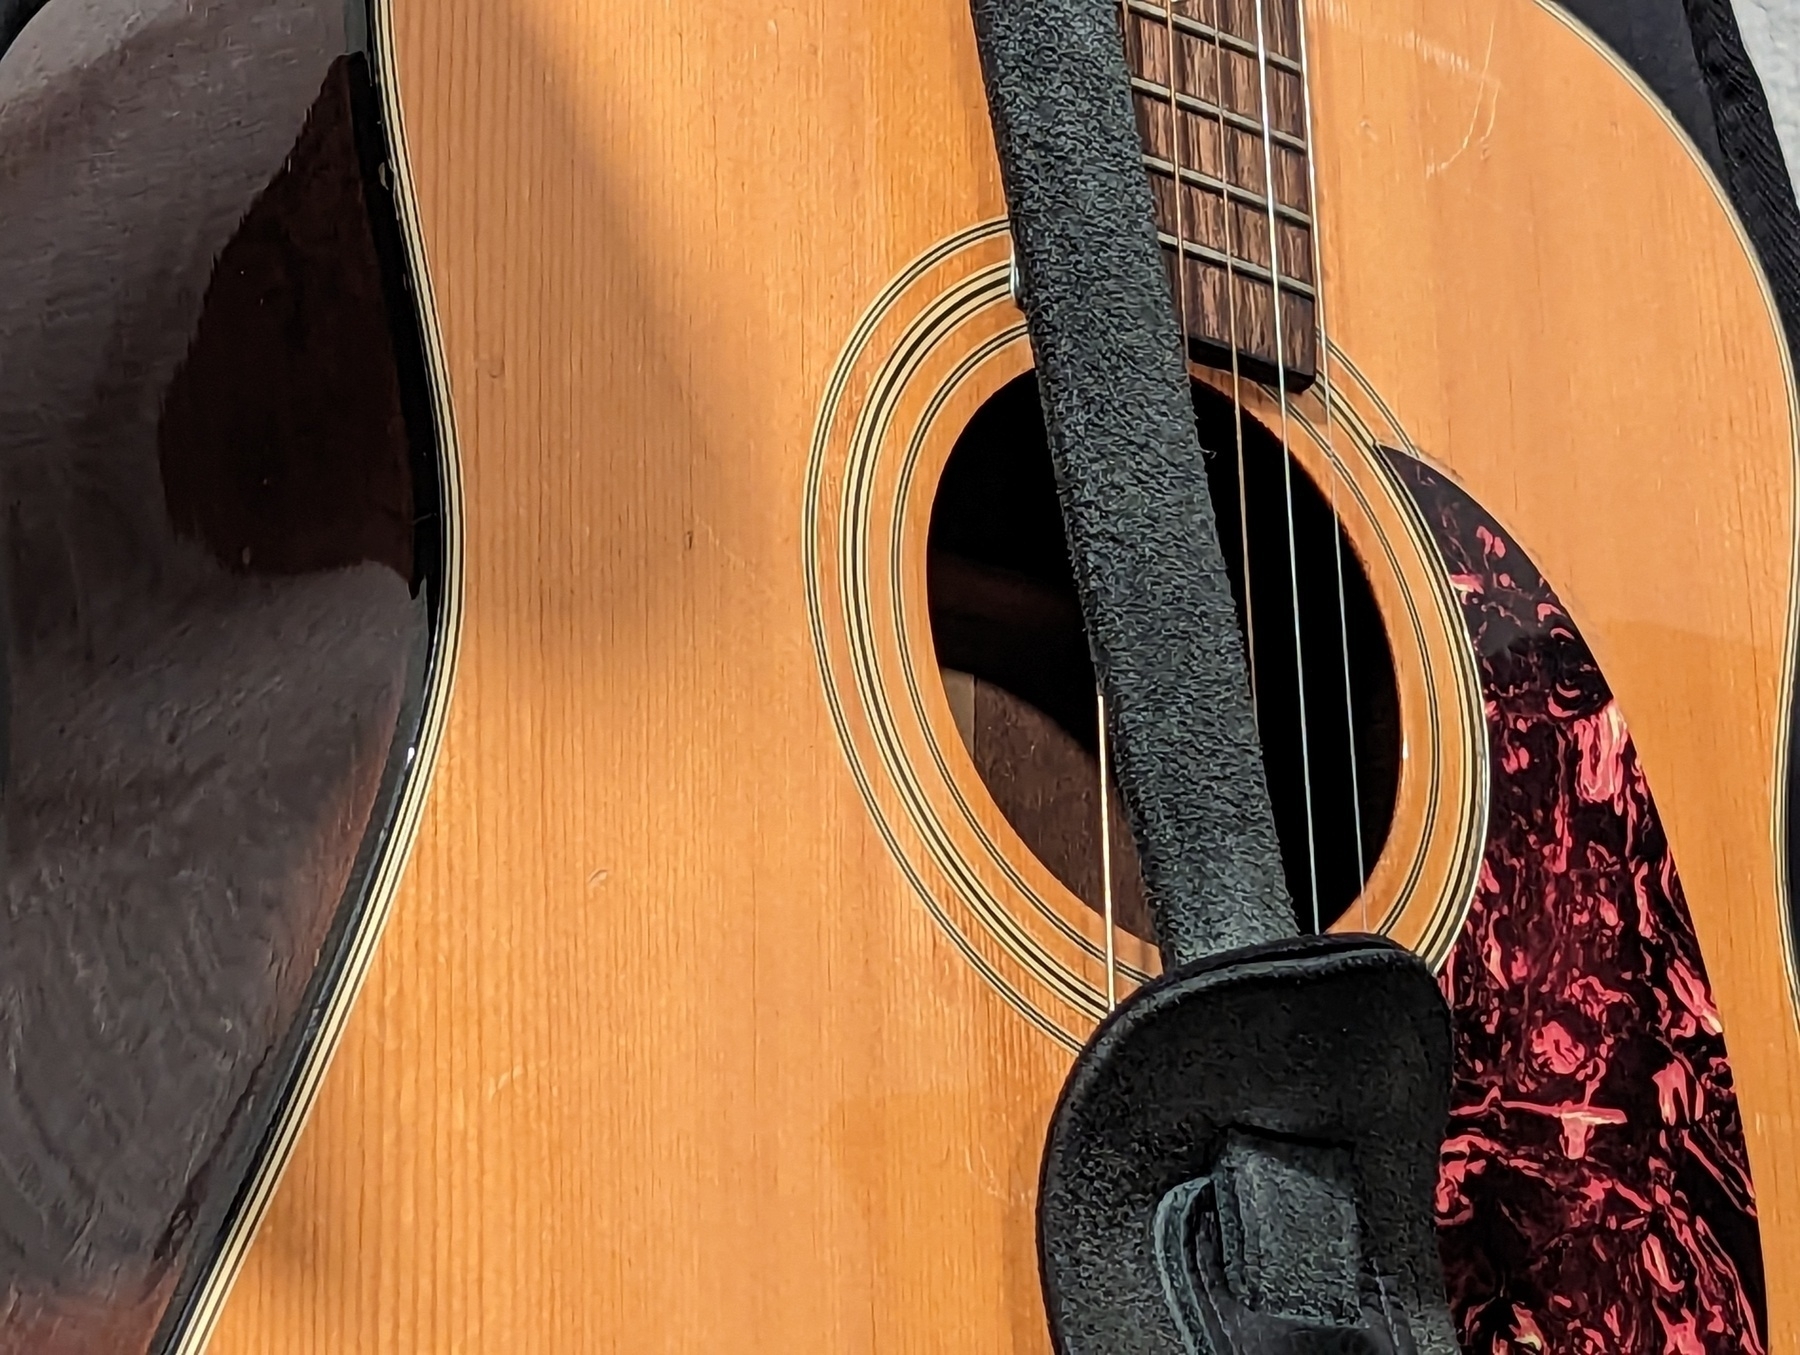 The backside of a black leather guitar strap hangs off the front of my Gibson Epiphone acoustic guitar Saturday, March 25, 2023 in San Pablo, California.